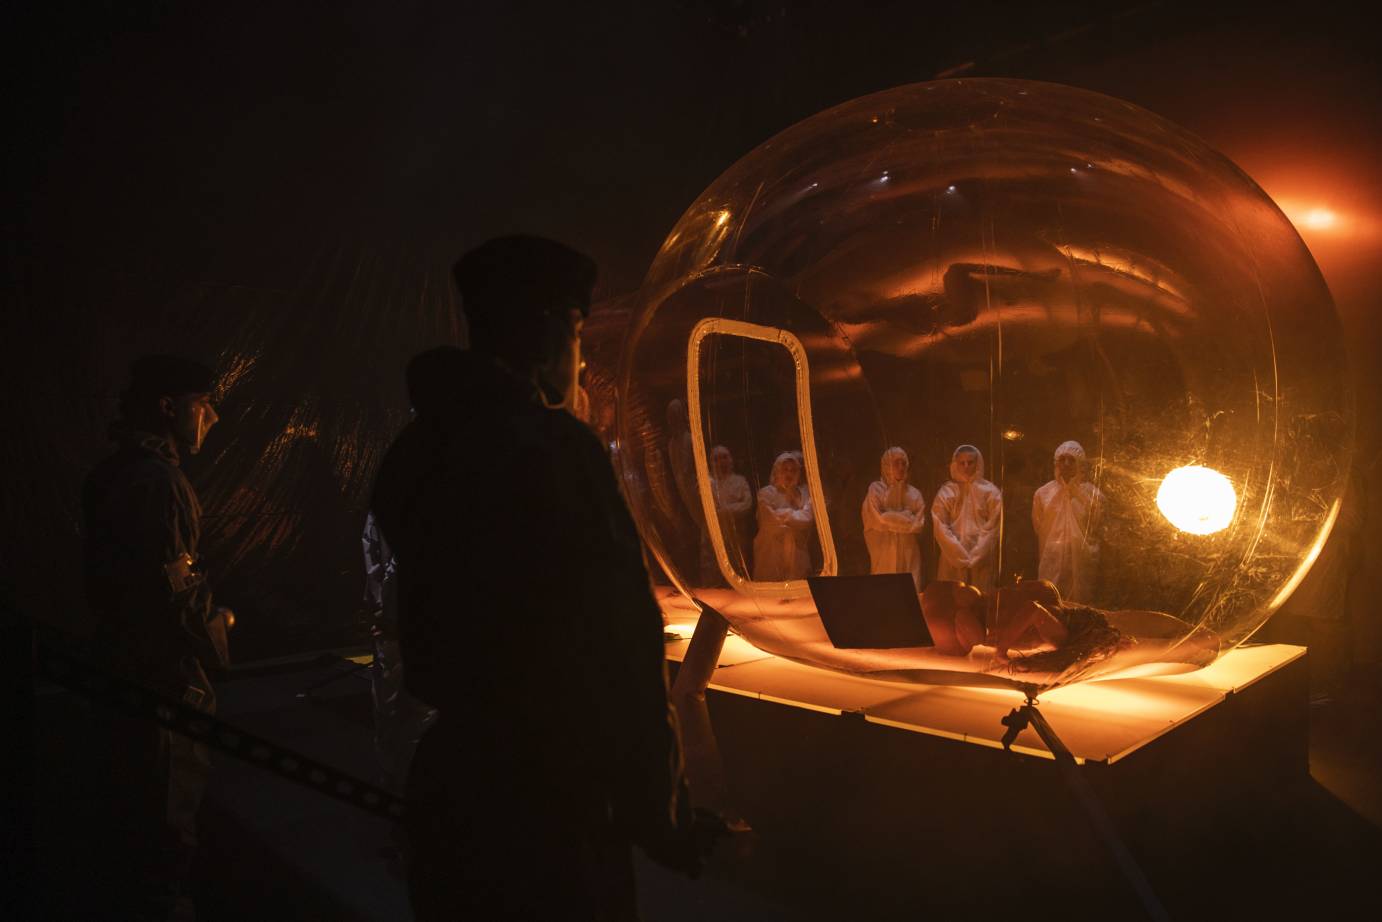 In the foreground, a woman crouches; in the background, three people in protective gear look at her through a bubble